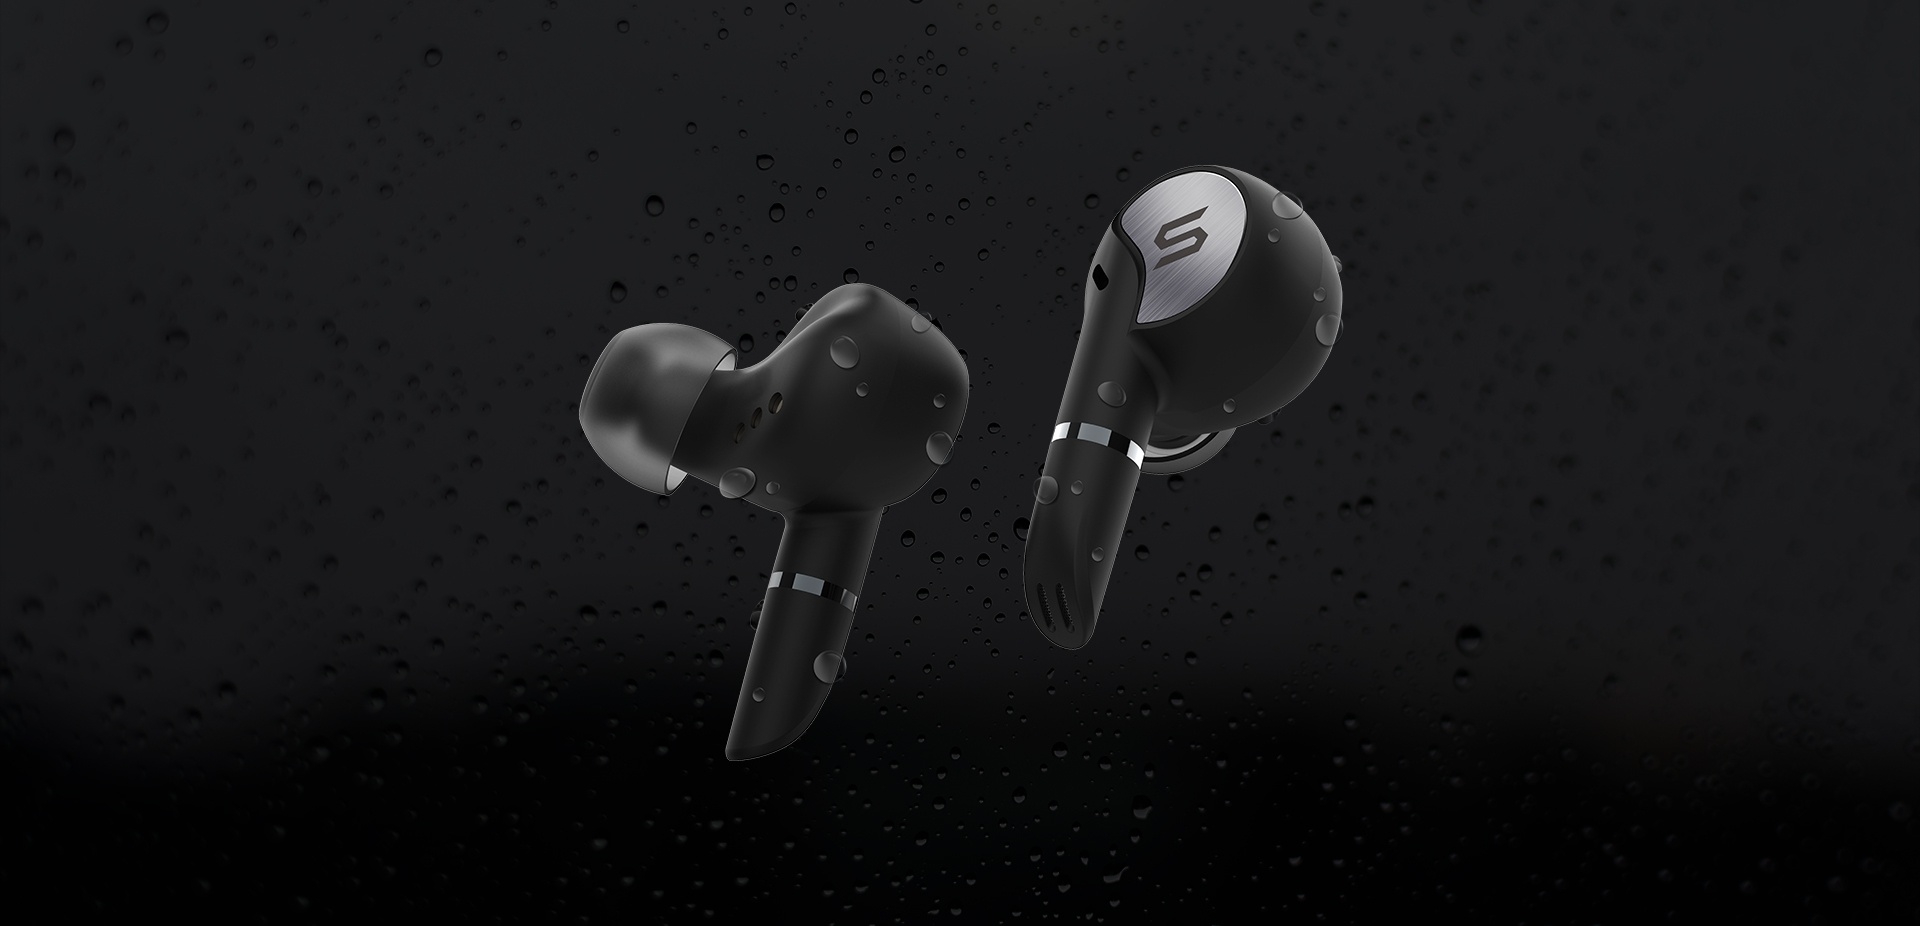 SOUL Launches SYNC Pro, its First-Ever True Wireless Earphones with Dual Microphones